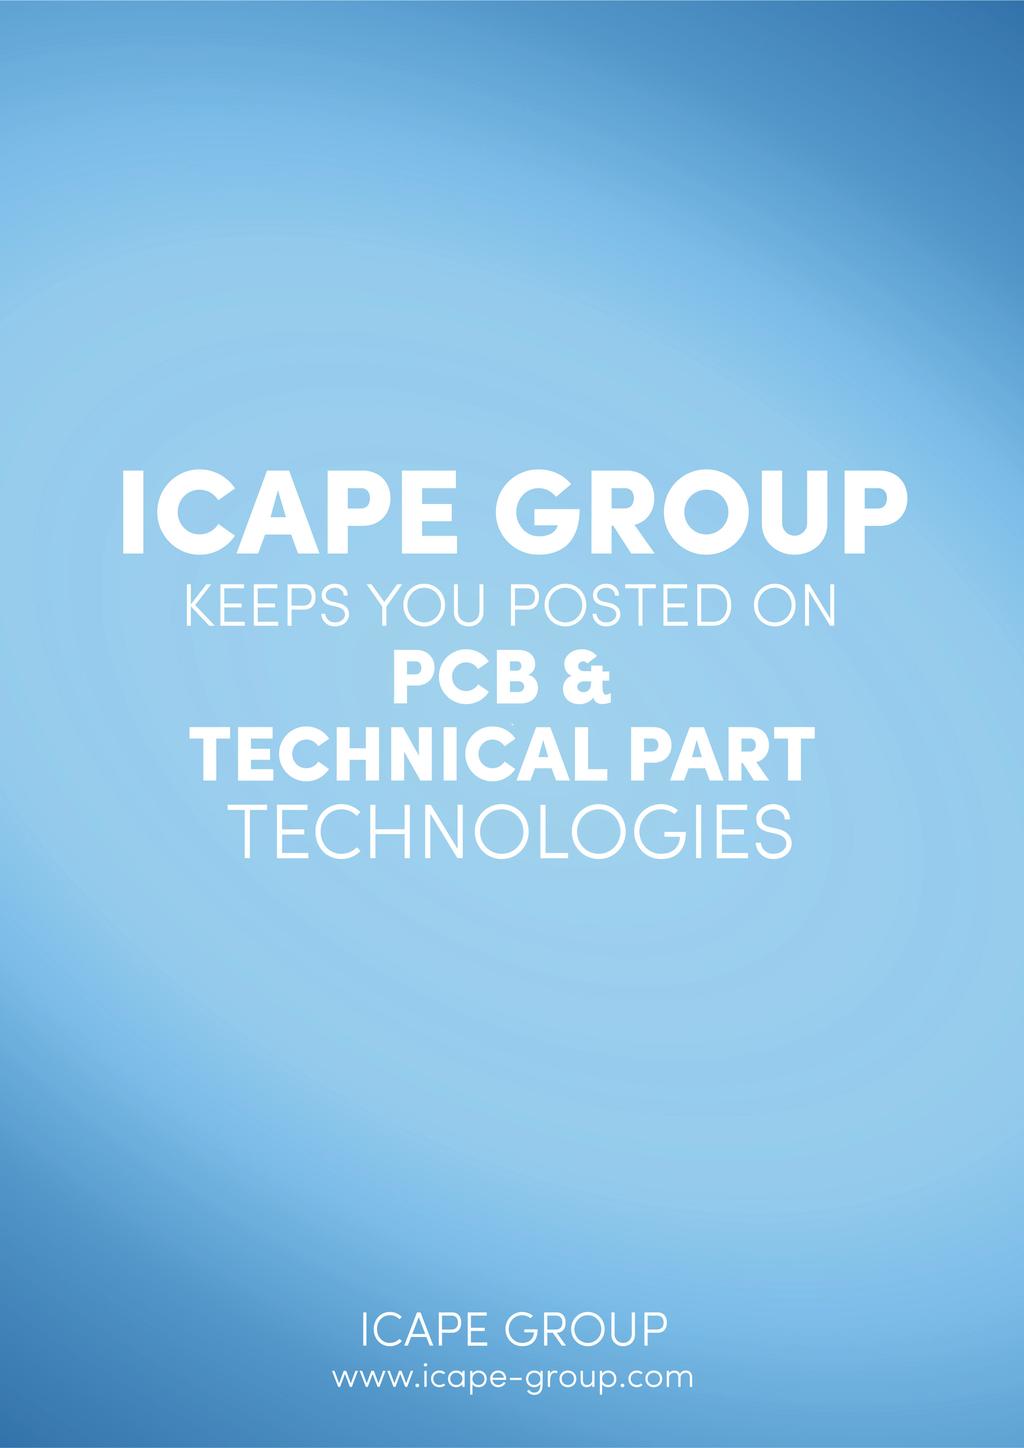 ICAPE Group keeps you posted on PCB & Technical Part Technologies YOUR